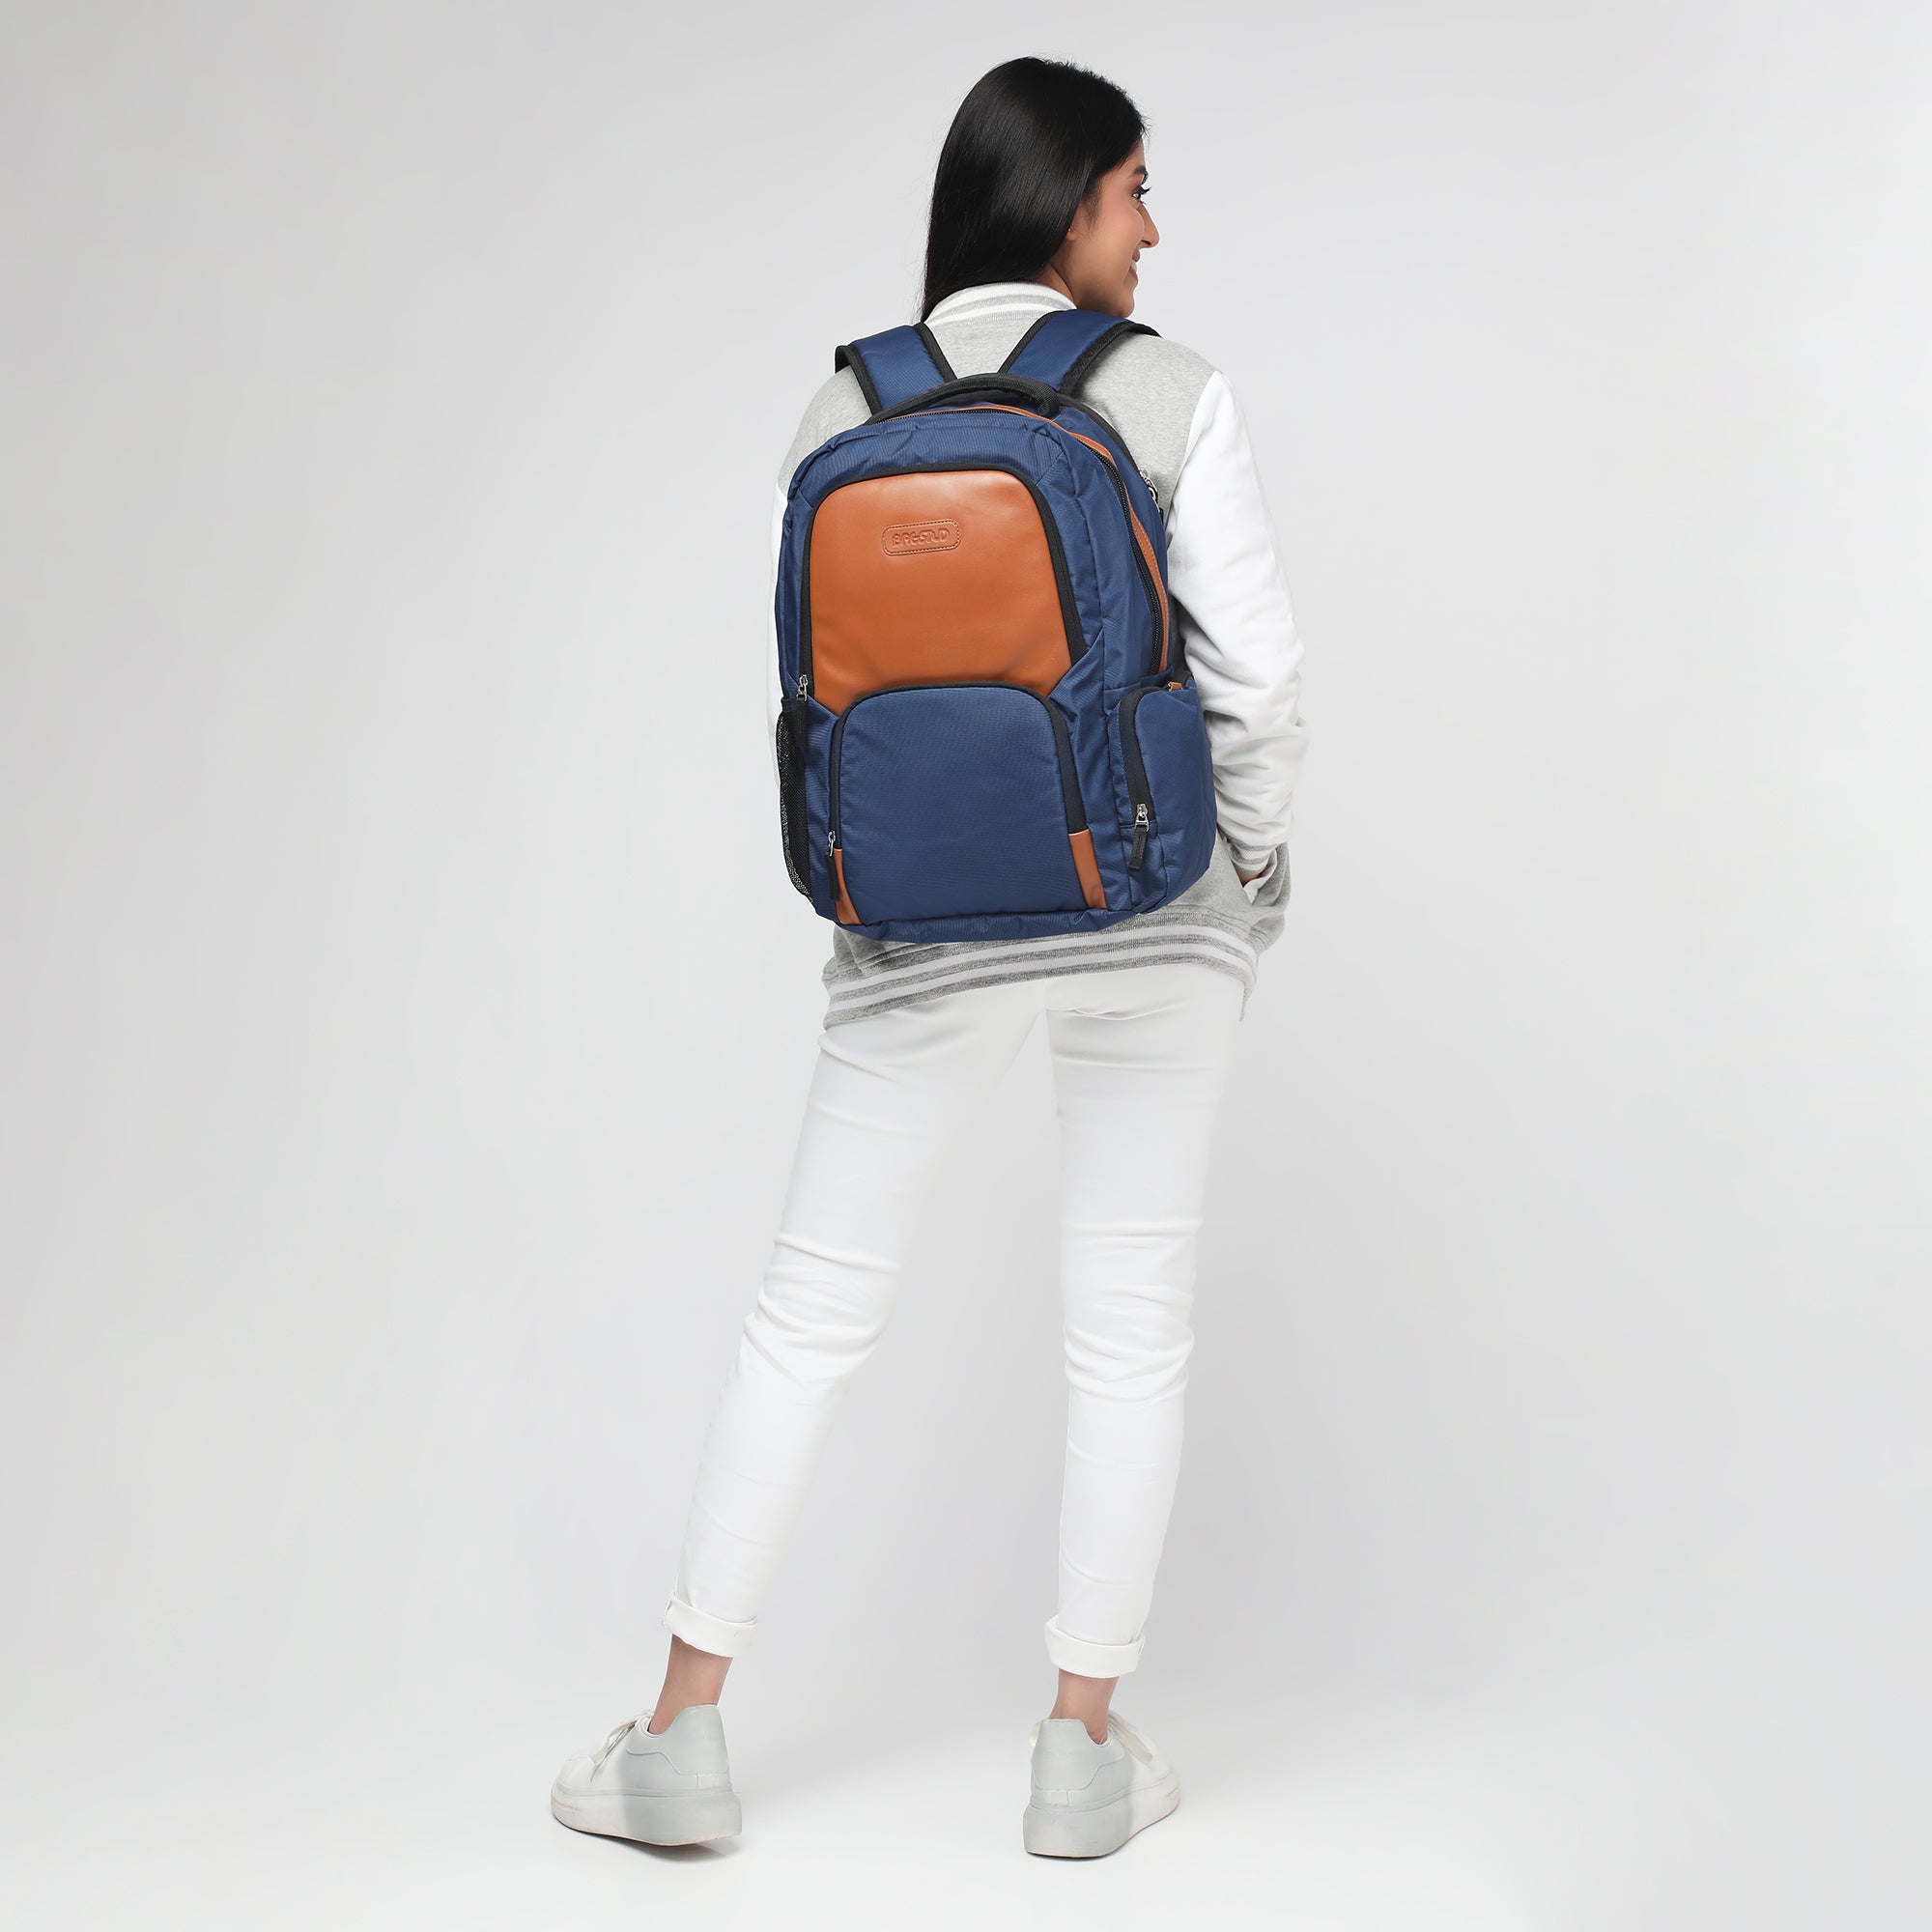 Essential Carry-All’s: 5 Everyday Backpacks You Will Love